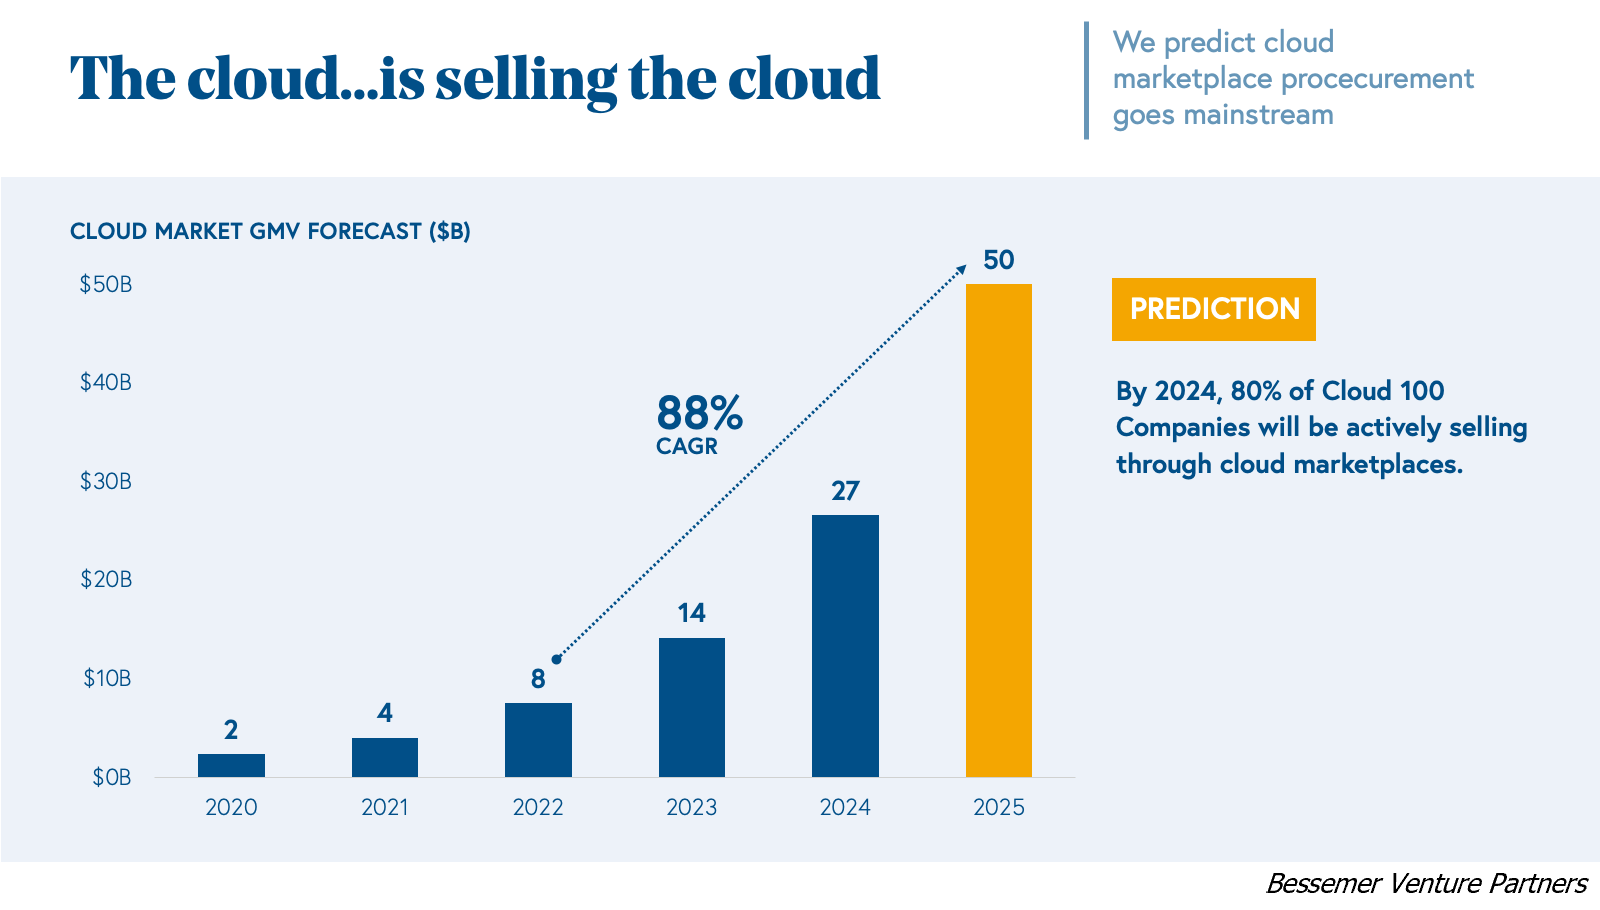 The Cloud is selling the cloud